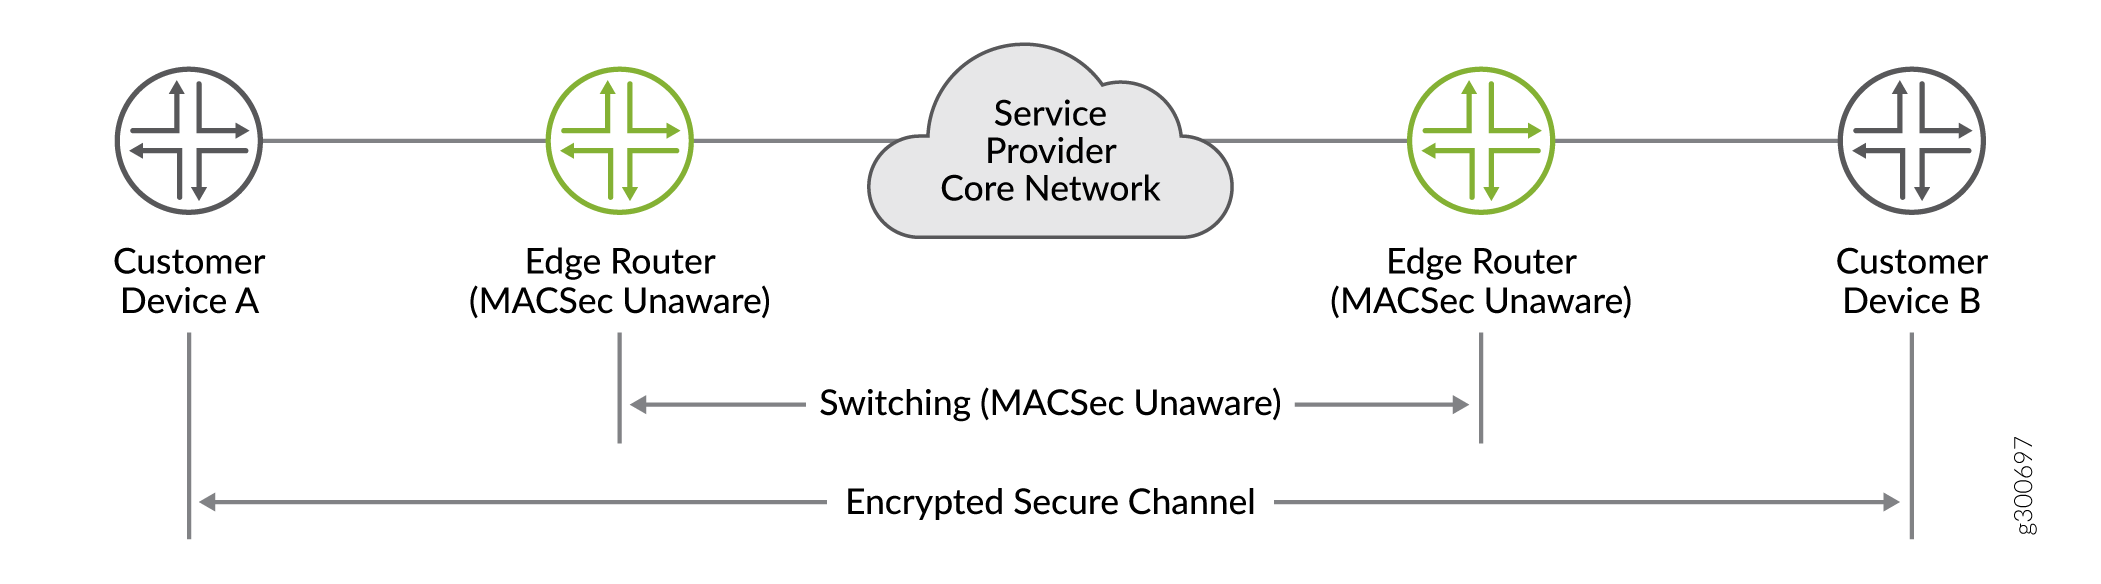 MACsec Carried over a Service Provider Network